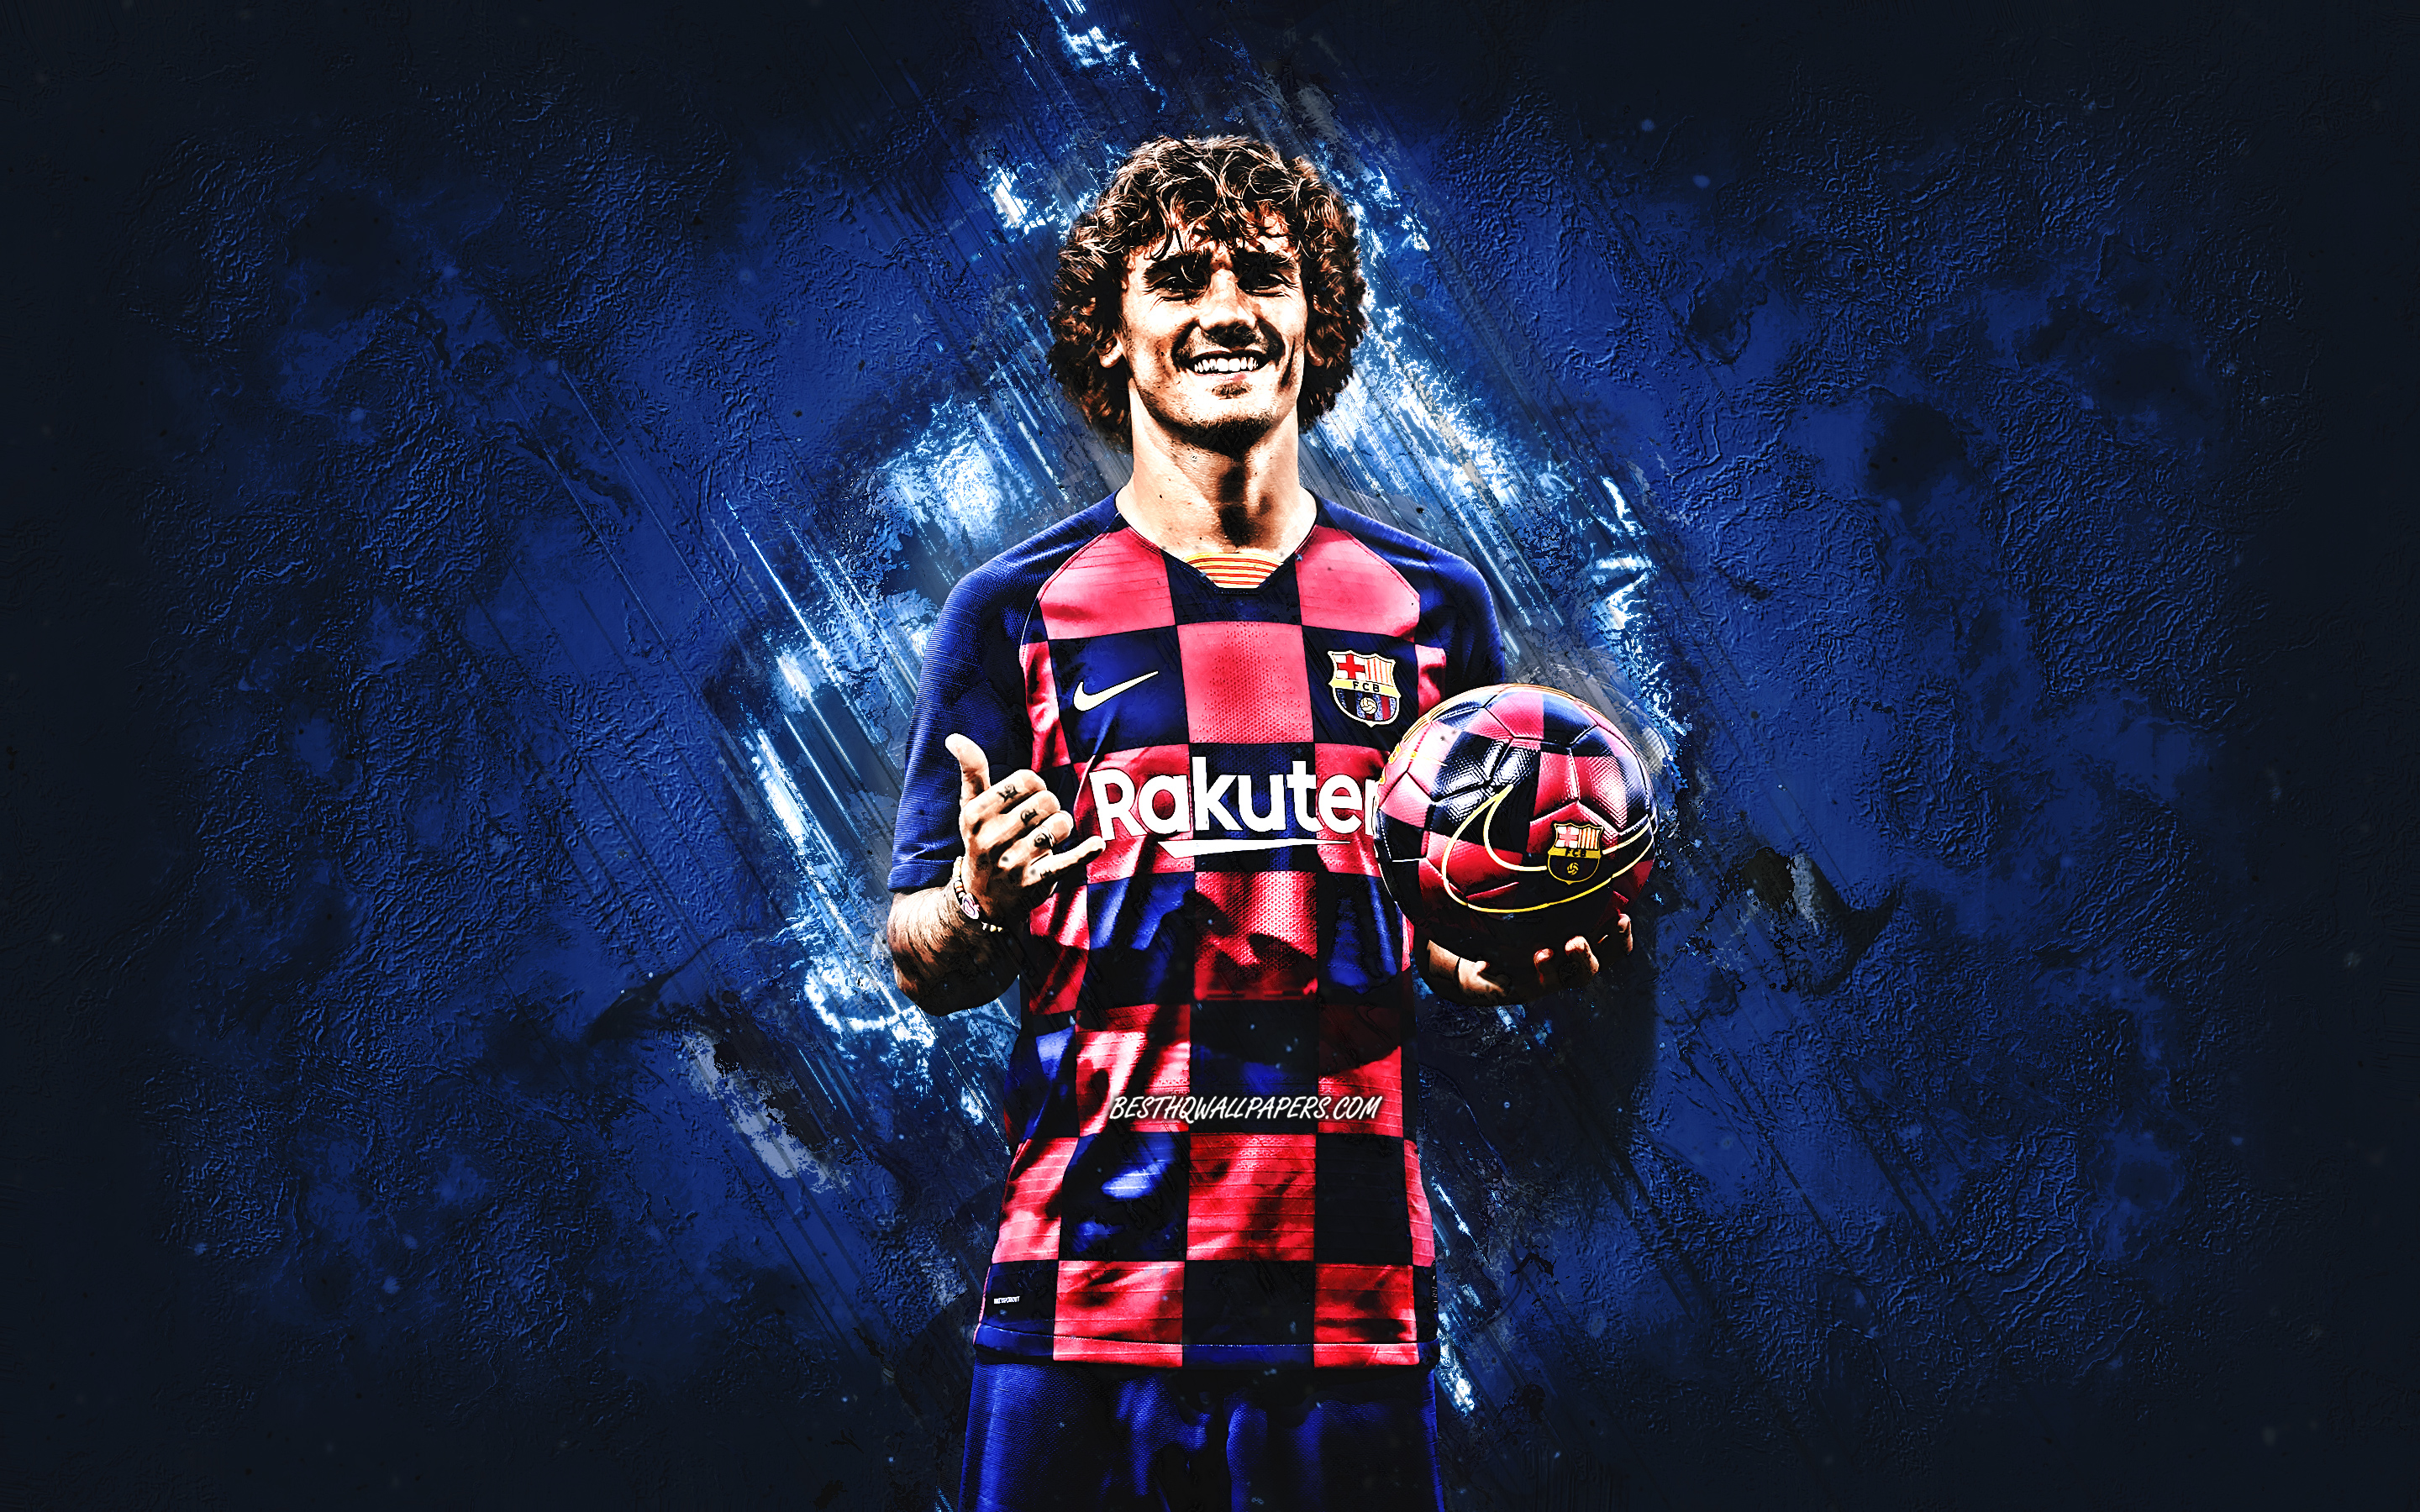 Download wallpaper Antoine Griezmann, portrait, FC Barcelona, 2020 Barcelona soccer players, french football player, striker, Catalan football club, Spain, football, La Liga for desktop with resolution 2880x1800. High Quality HD picture wallpaper